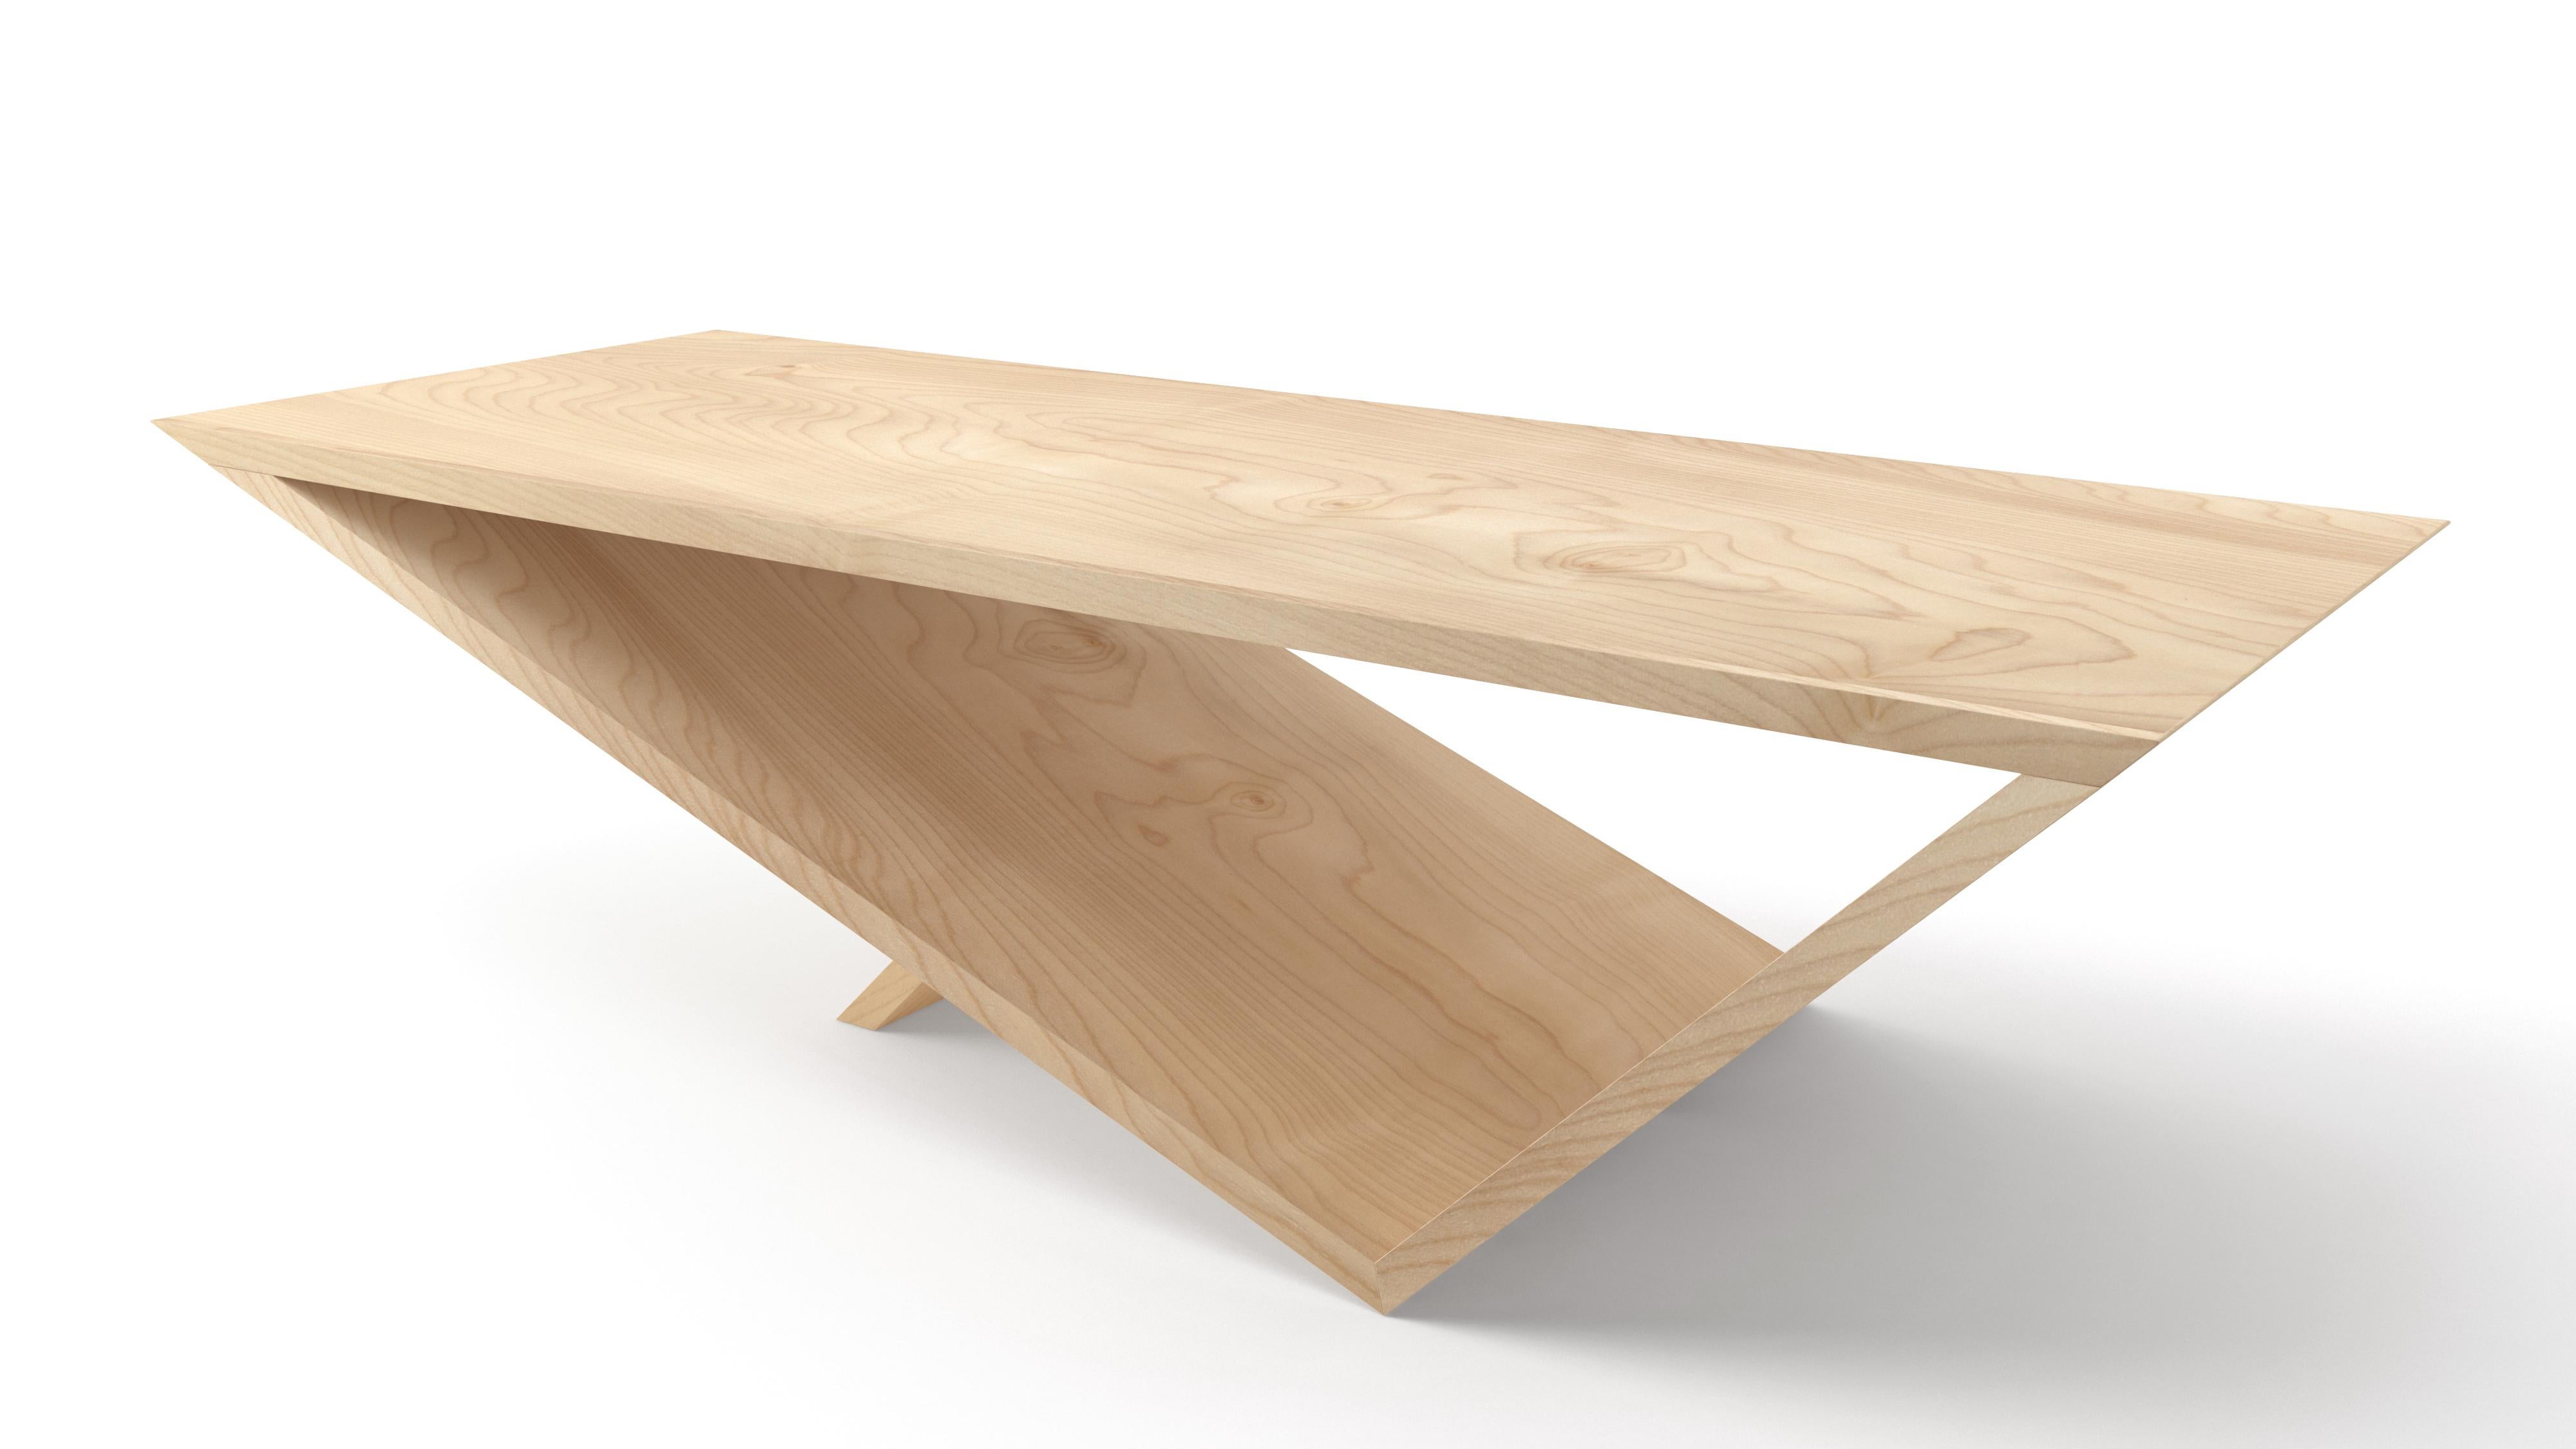 Time/Space Portal Table in solid maple hardwood.

The inspiration for the Time/Space Portal Table collection comes from the power, simplicity, and elegance of the triangle.
This is an ongoing series exploring the dynamics of balance, weight,